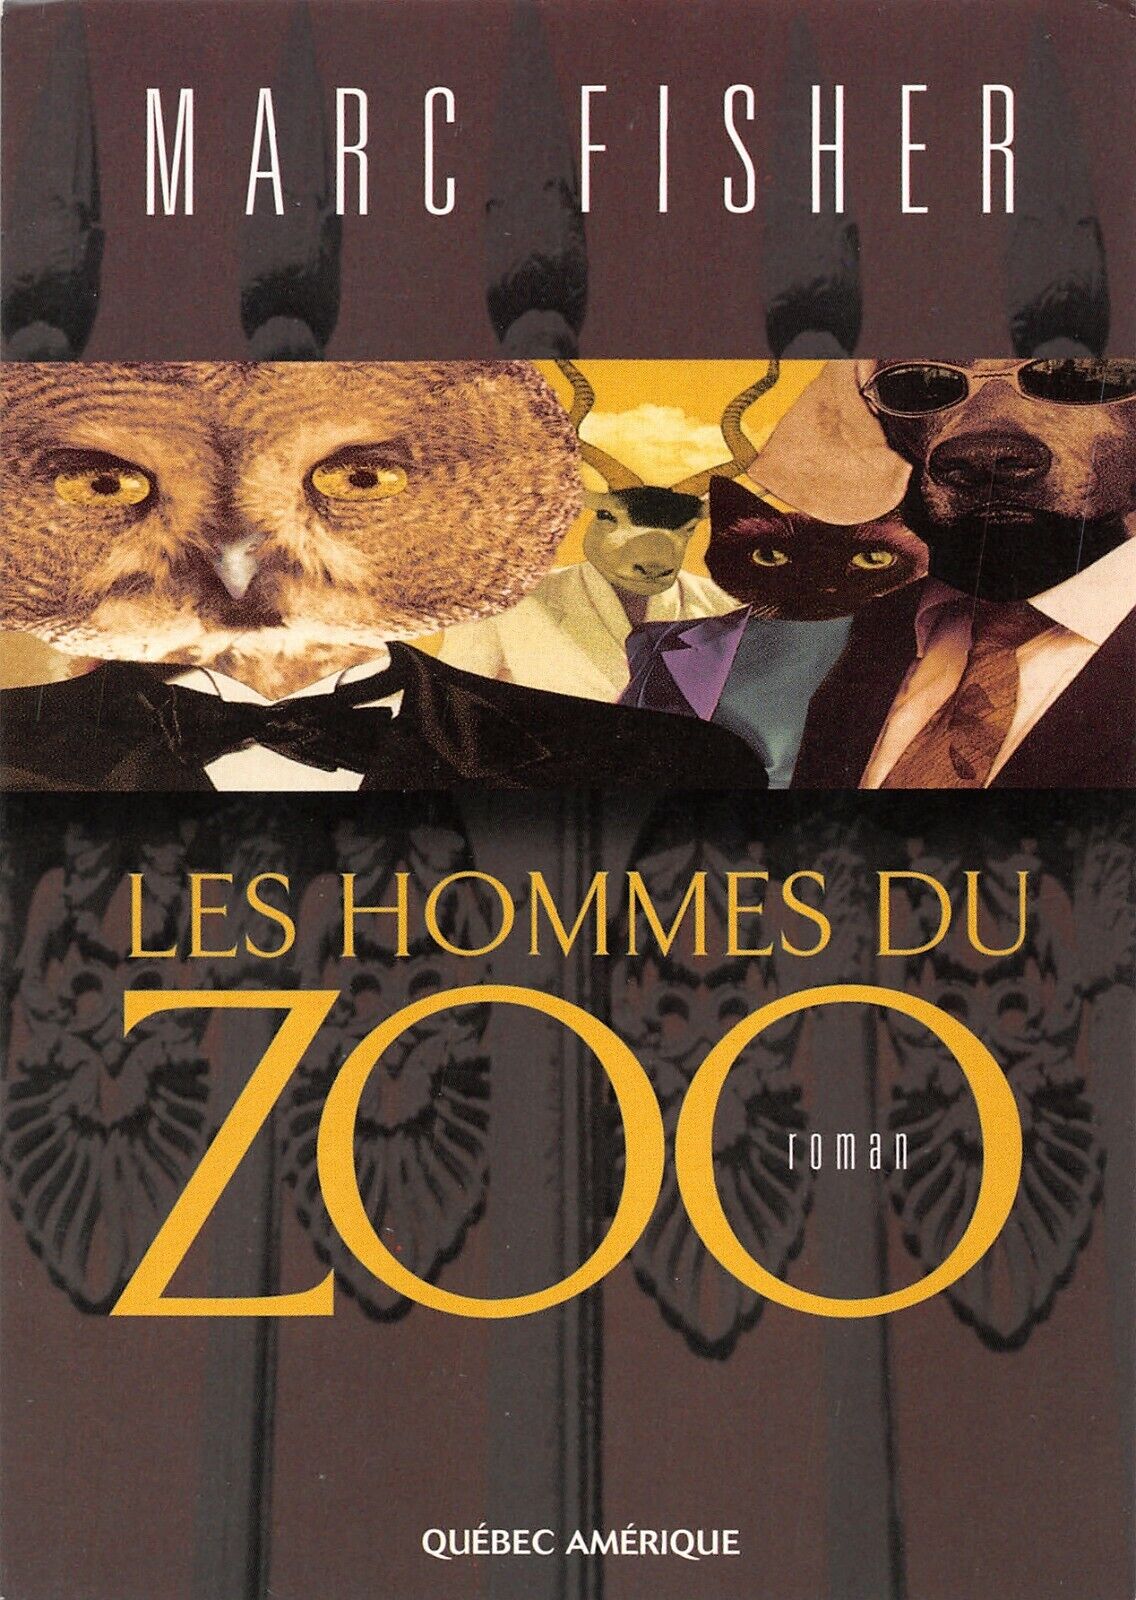 Les Hommes du Zoo Roman by Marc Fisher French Book Ad Promo Postcard